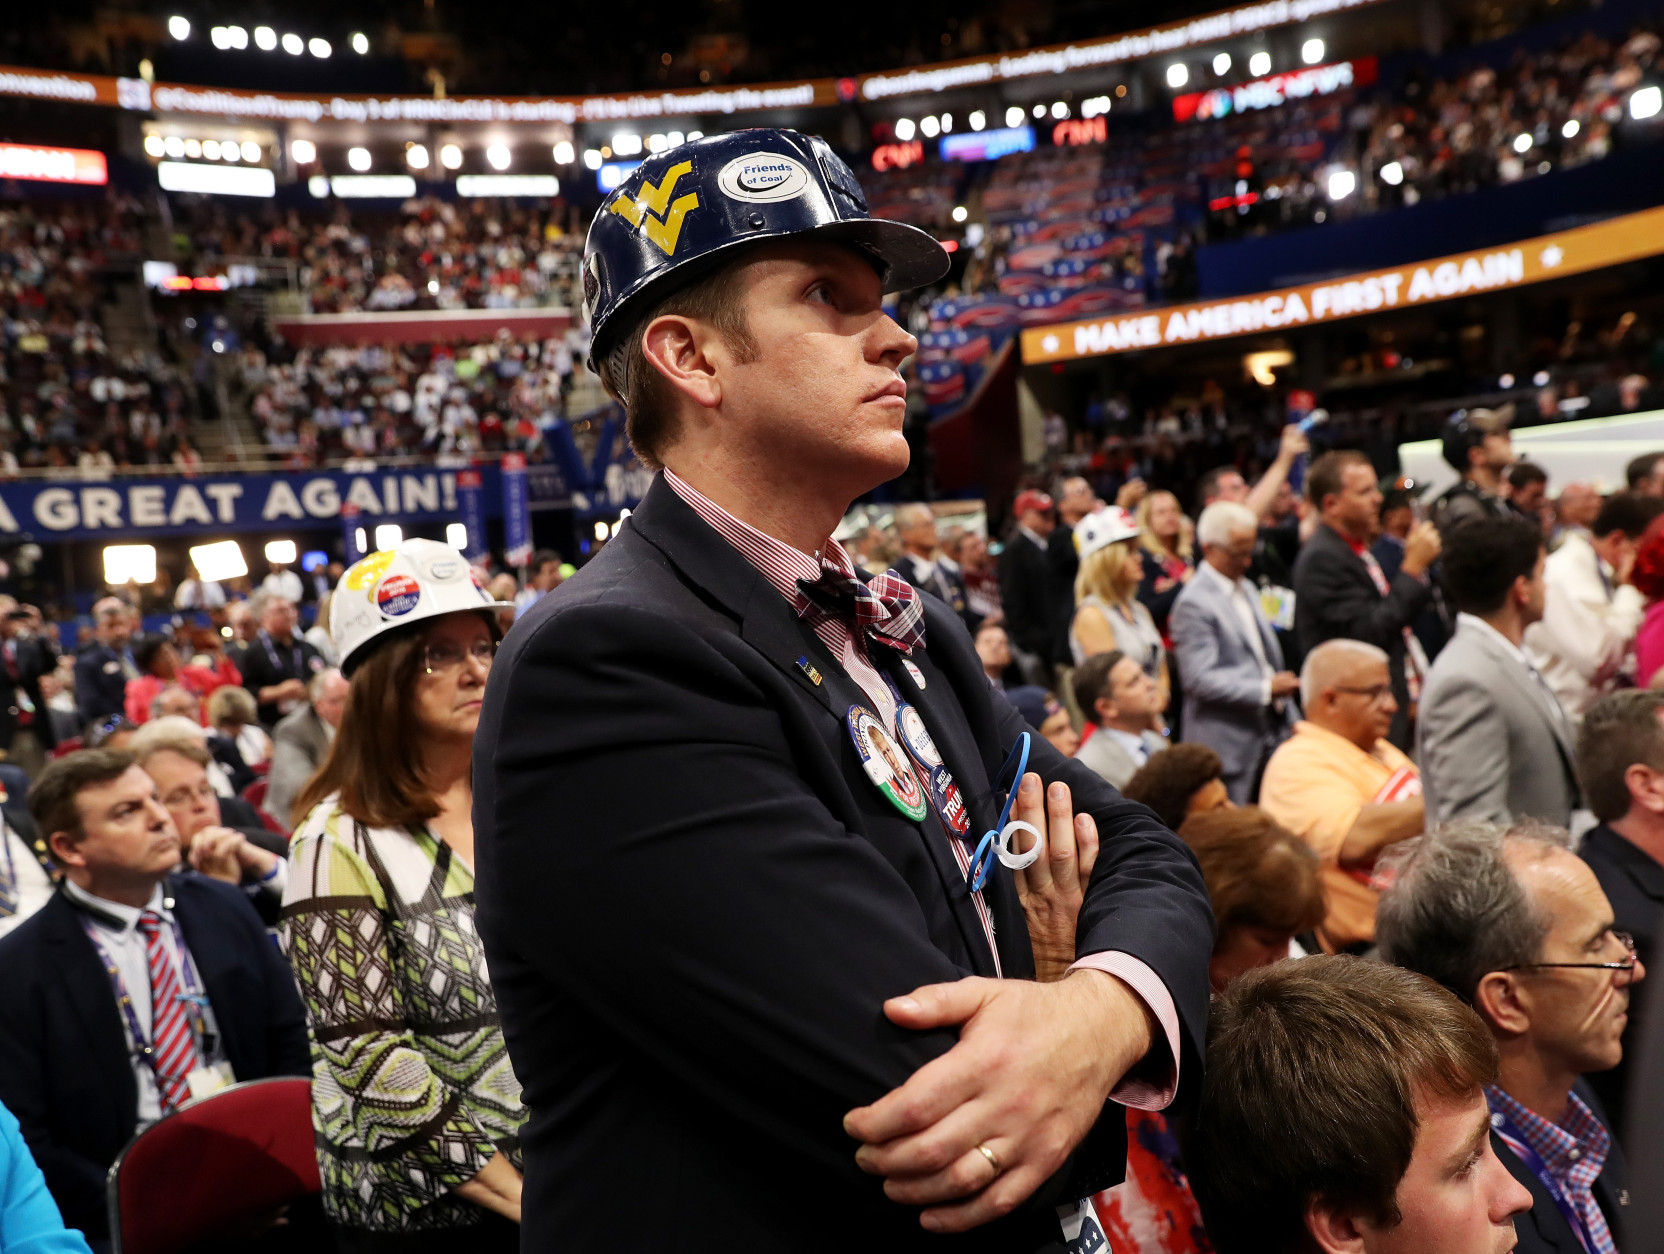 CLEVELAND, OH - JULY 20: A West Virginia delegate stands as he listens to Sen. Ted Cruz (R-TX) delivering a speech on the third day of the Republican National Convention on July 20, 2016 at the Quicken Loans Arena in Cleveland, Ohio. Republican presidential candidate Donald Trump received the number of votes needed to secure the party's nomination. An estimated 50,000 people are expected in Cleveland, including hundreds of protesters and members of the media. The four-day Republican National Convention kicked off on July 18.  (Photo by John Moore/Getty Images)